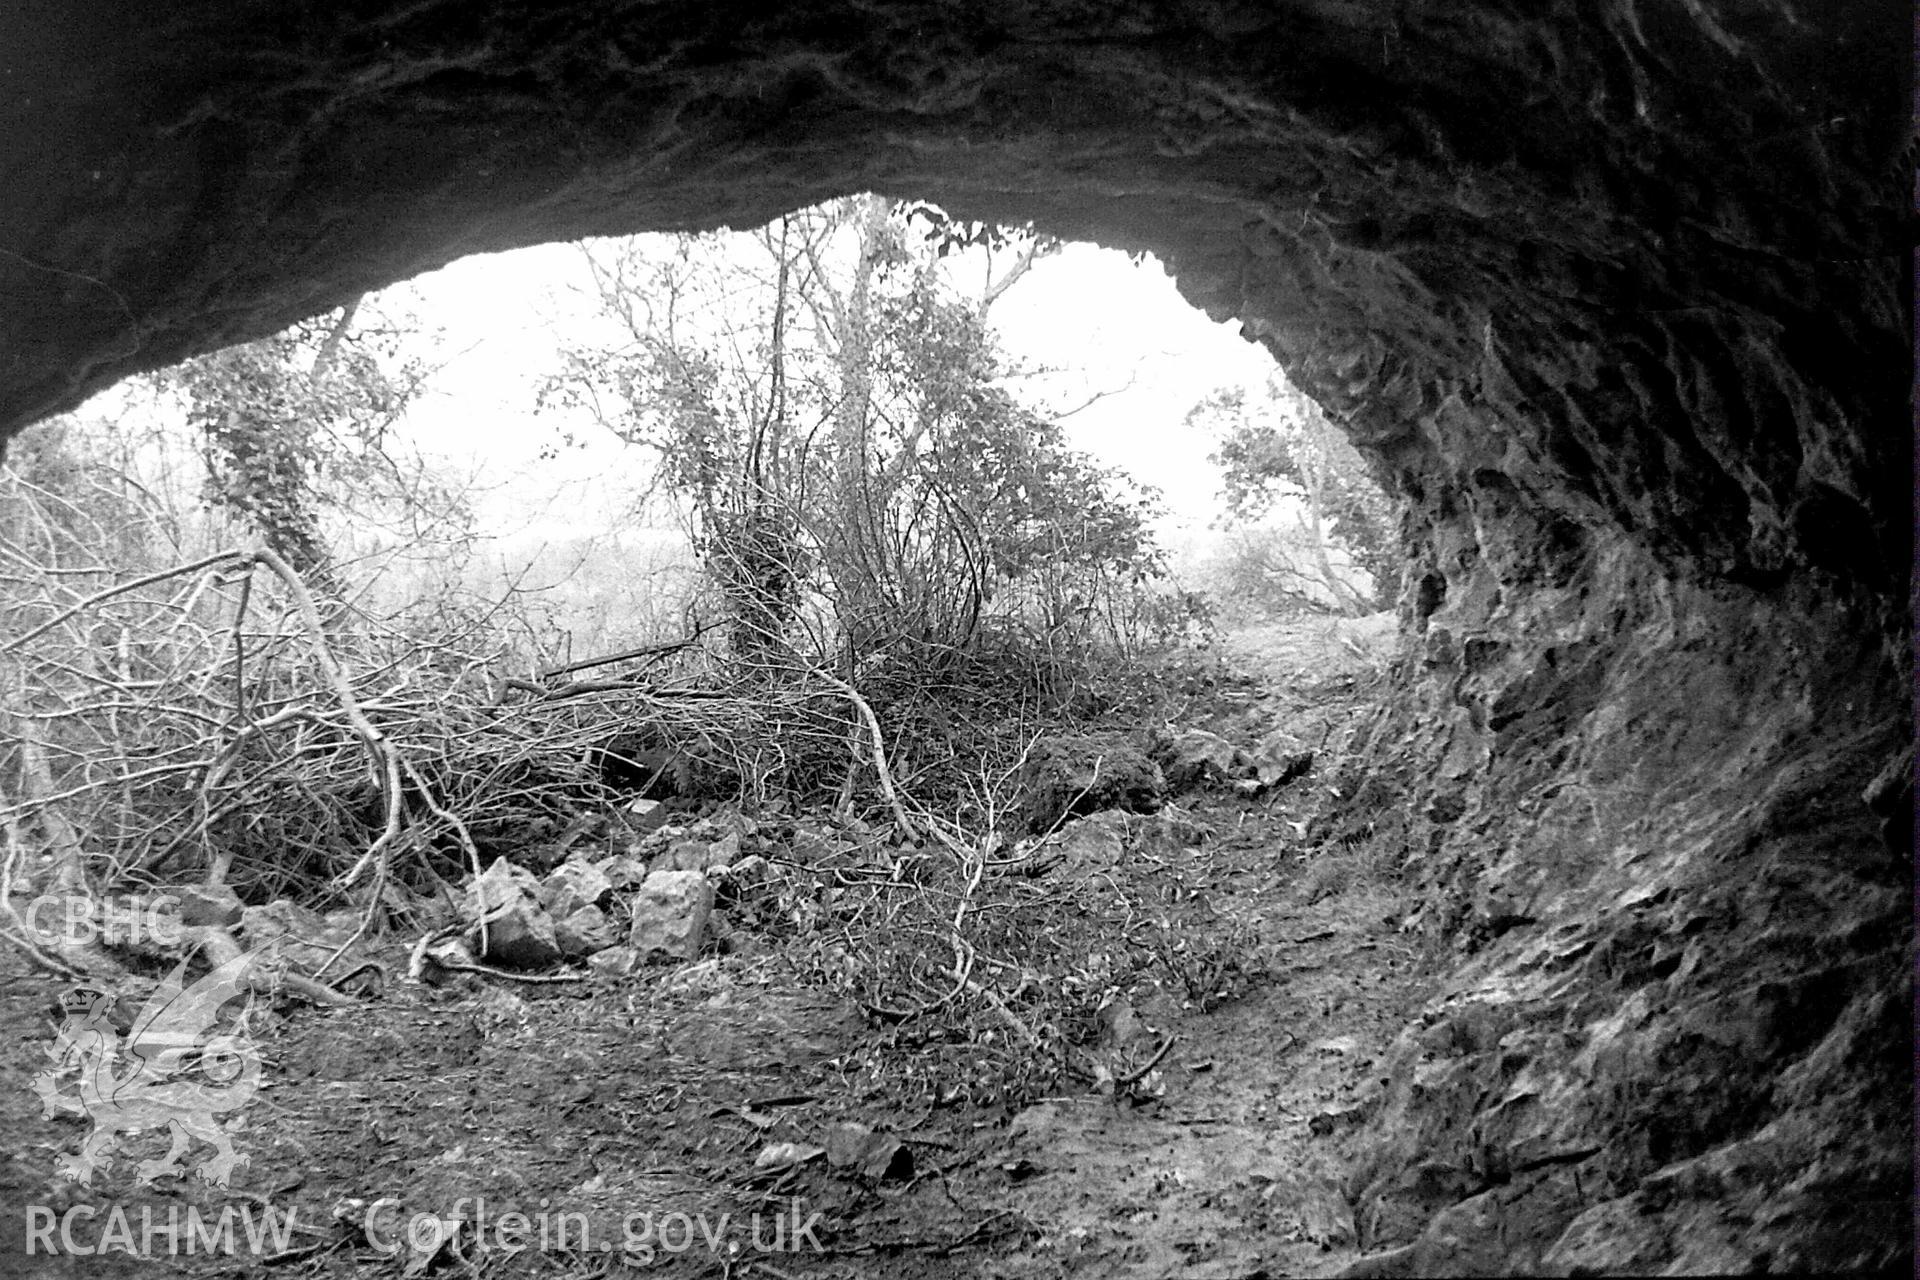 Digital photograph showing interior view of Catshole Cave. Produced by Paul Davis in 1982